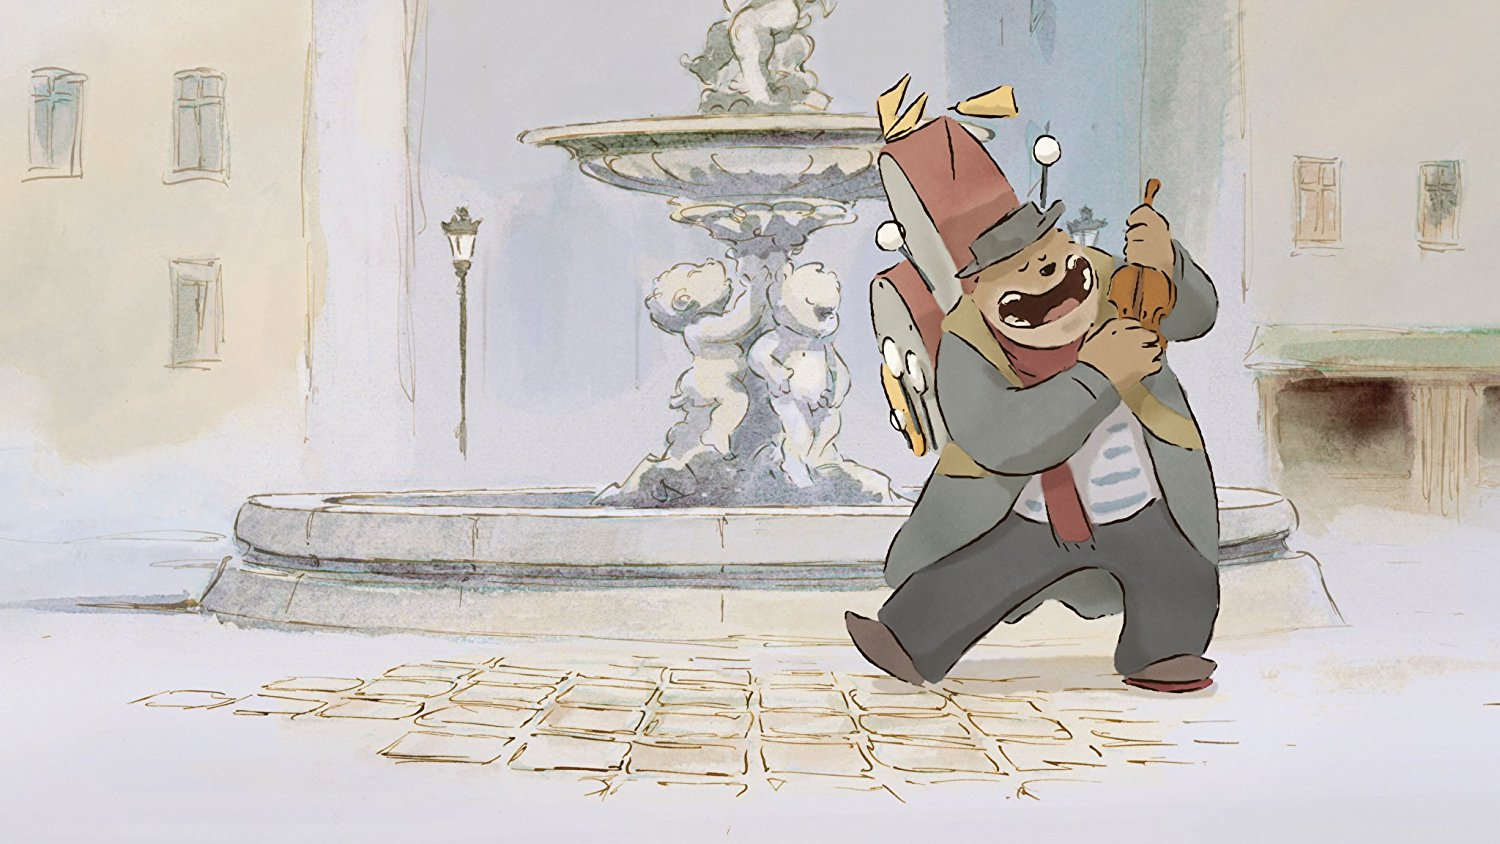 Ernest and Celestine - A bear plays the violin in the street.